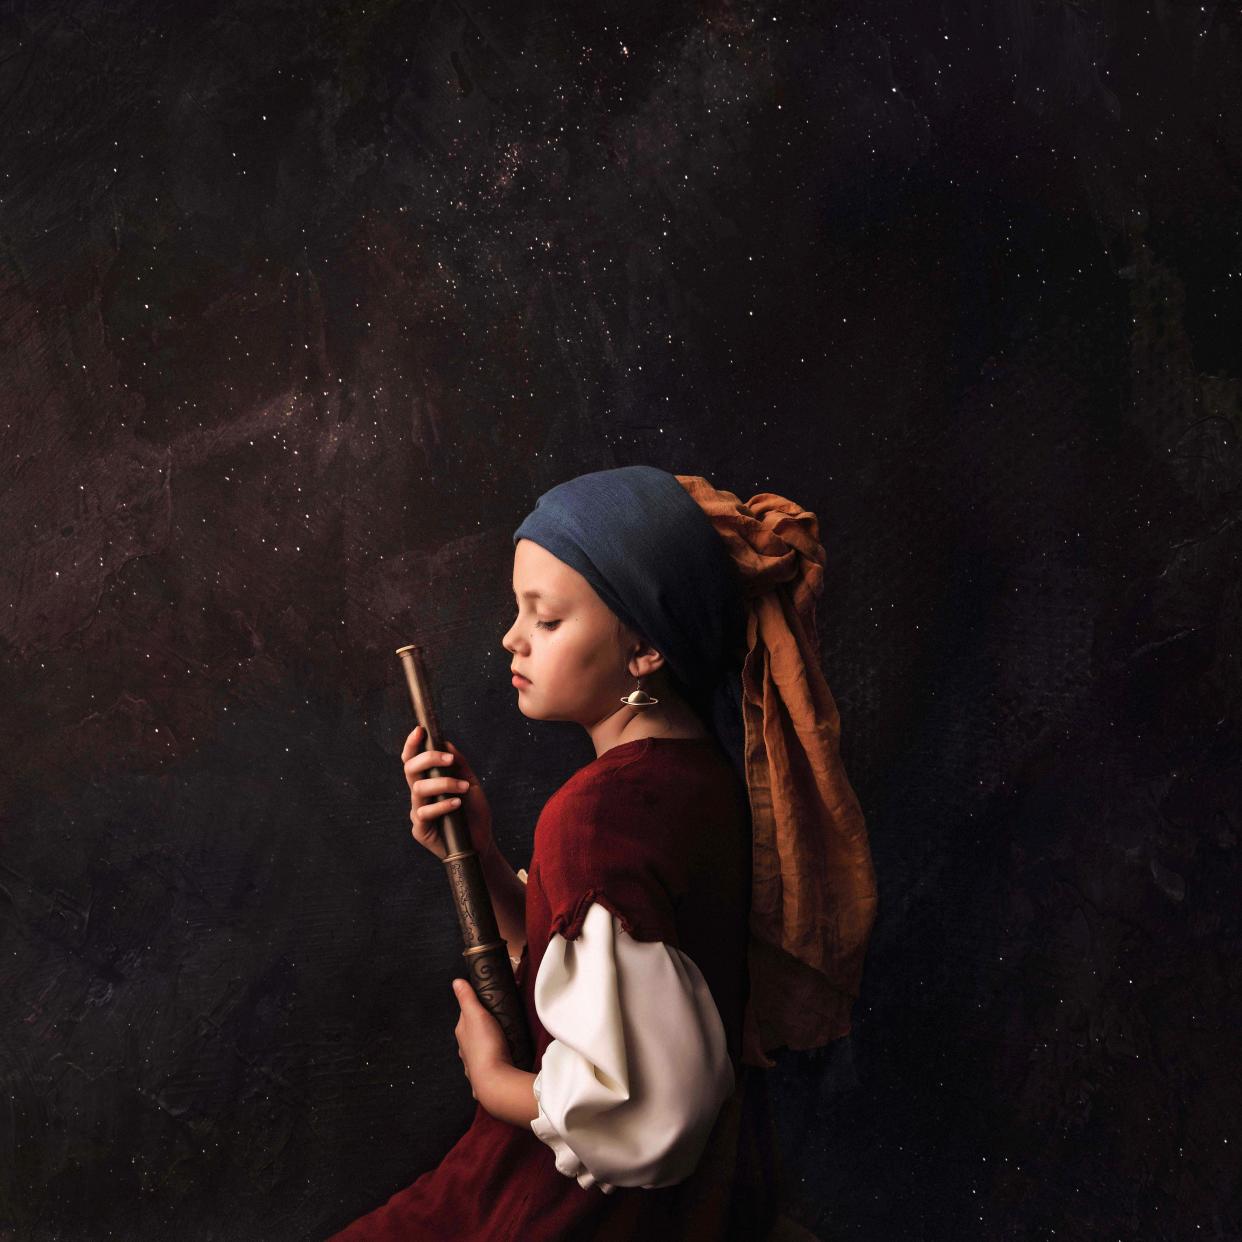 Sagan Lengacher, a Bloomington sixth-grader, wears a rather large, Saturn-styled earring in a photo by her mother, Katy, titled “Girl With Big Dreams,” which will be shown during May in a museum in Amsterdam next to Vermeer’s classic painting “Girl With a Pearl Earring."